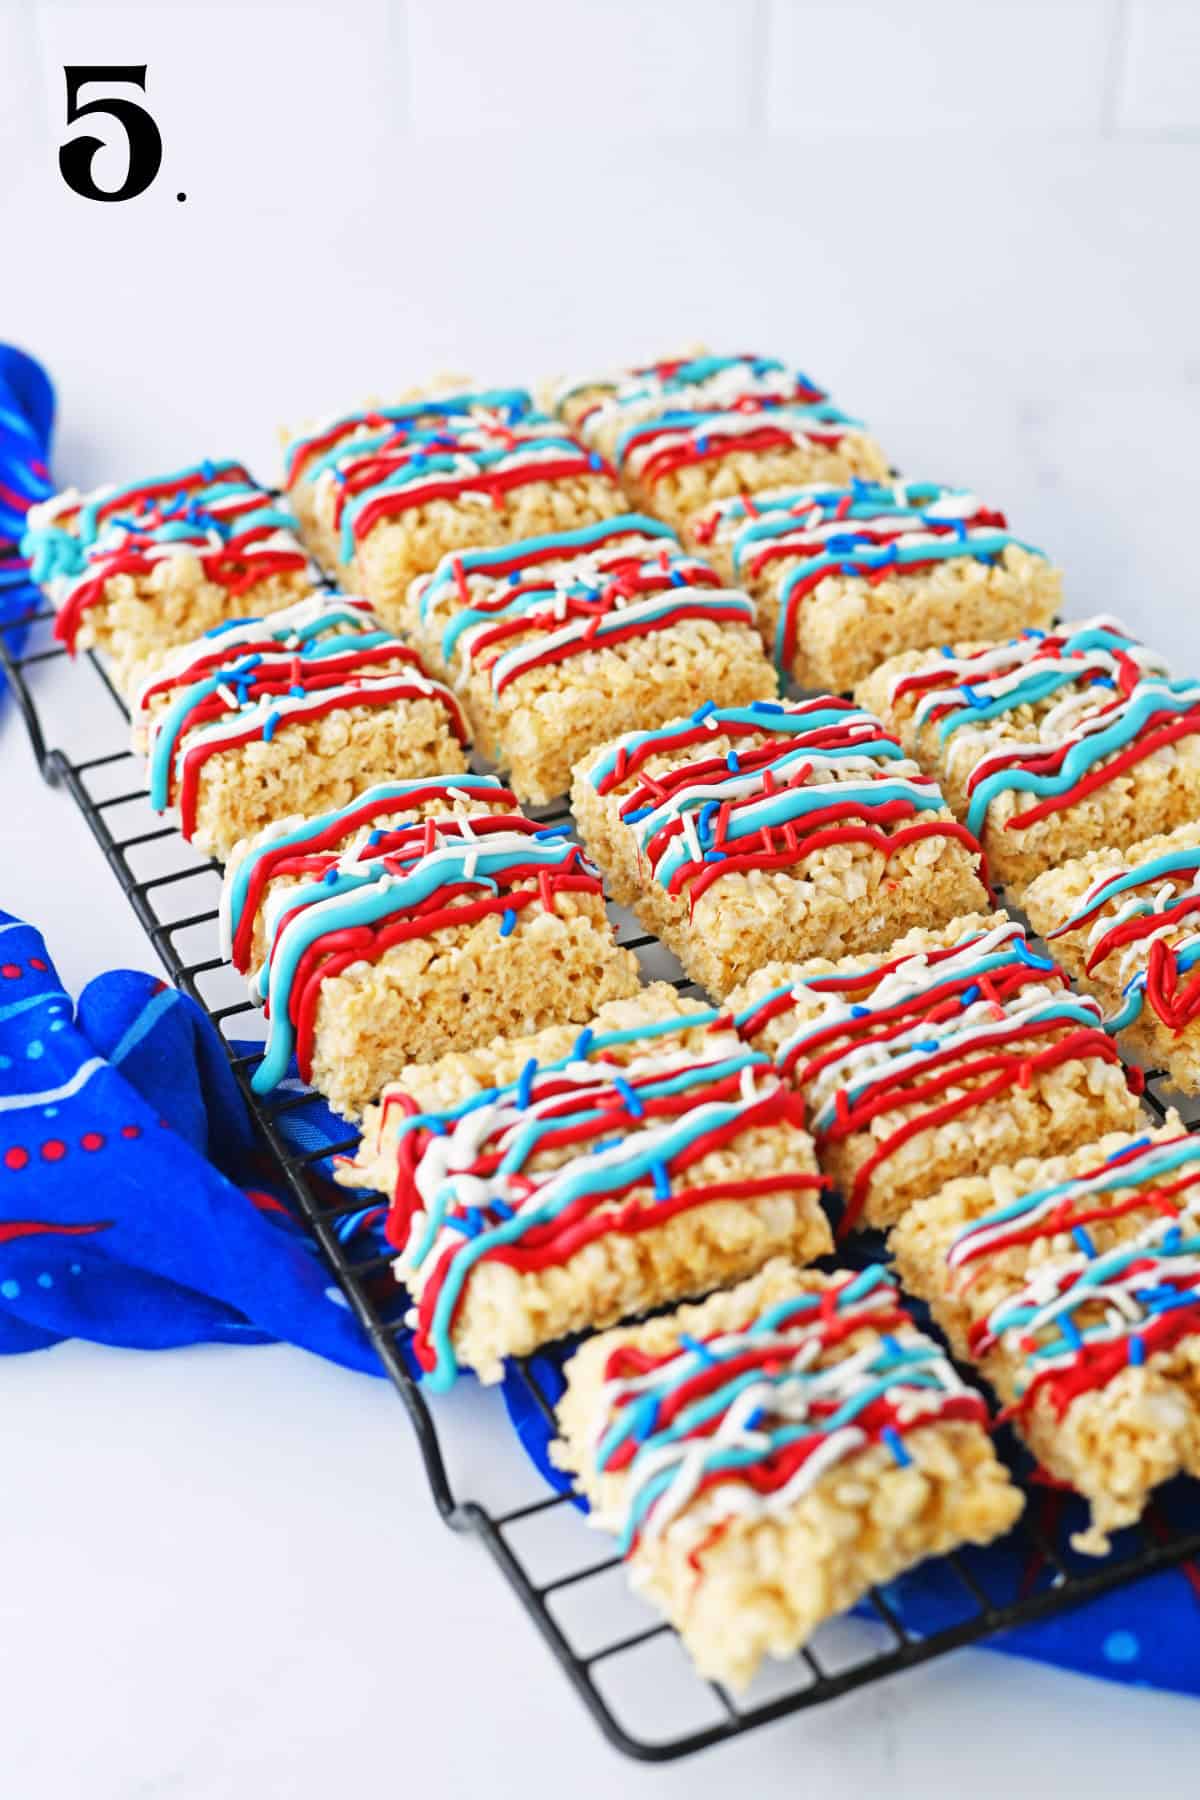 How to Make 4th of July Rice Krispie Treats - Step 5.